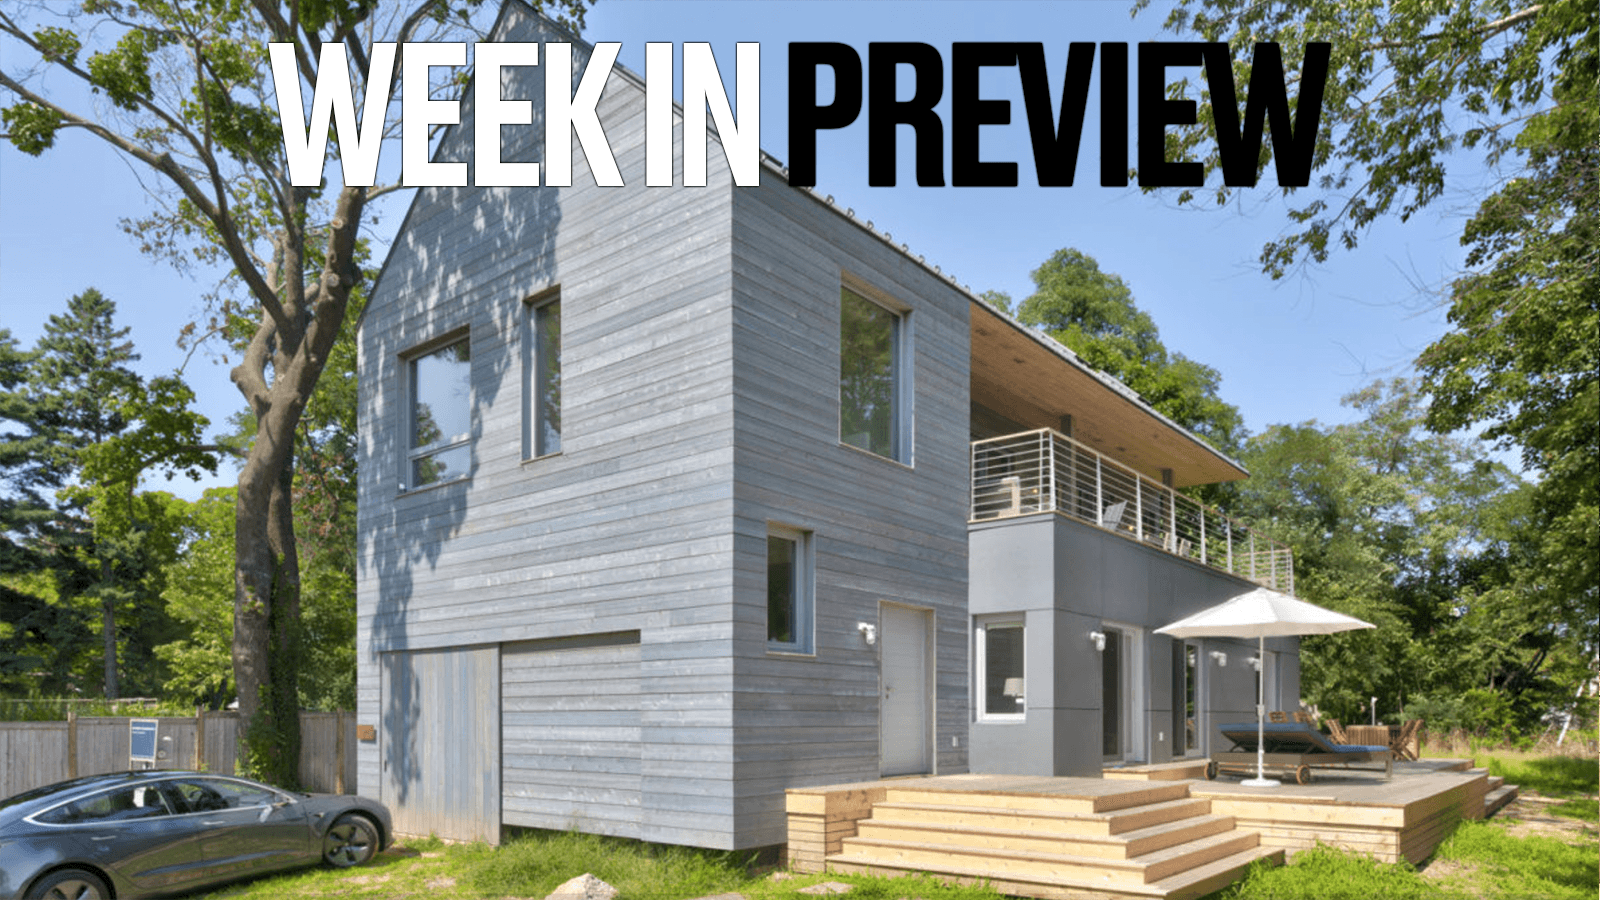 Week In Preview: February 21